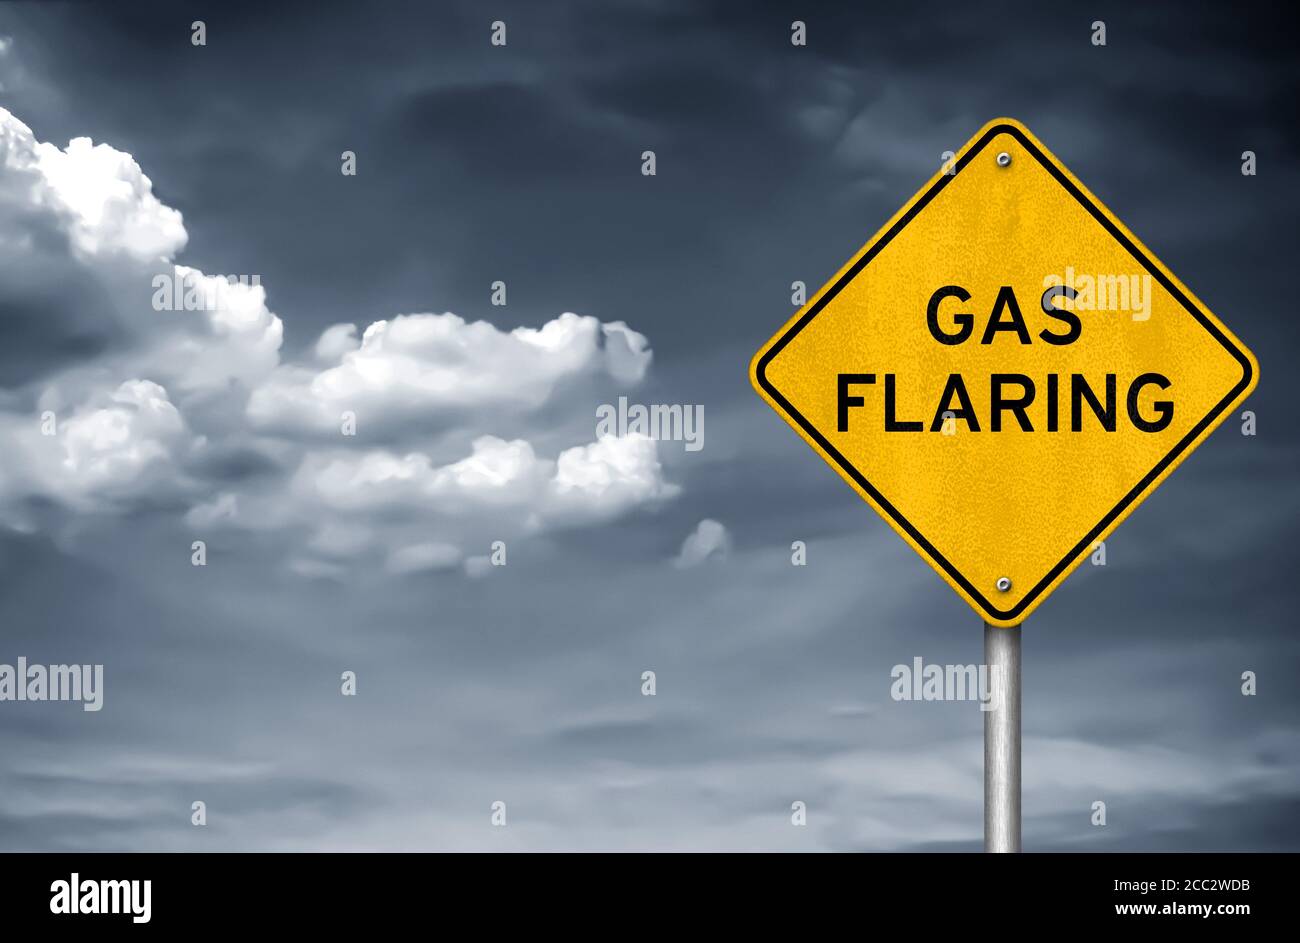 Stop Flaring of Gas - roadsign concept Stock Photo